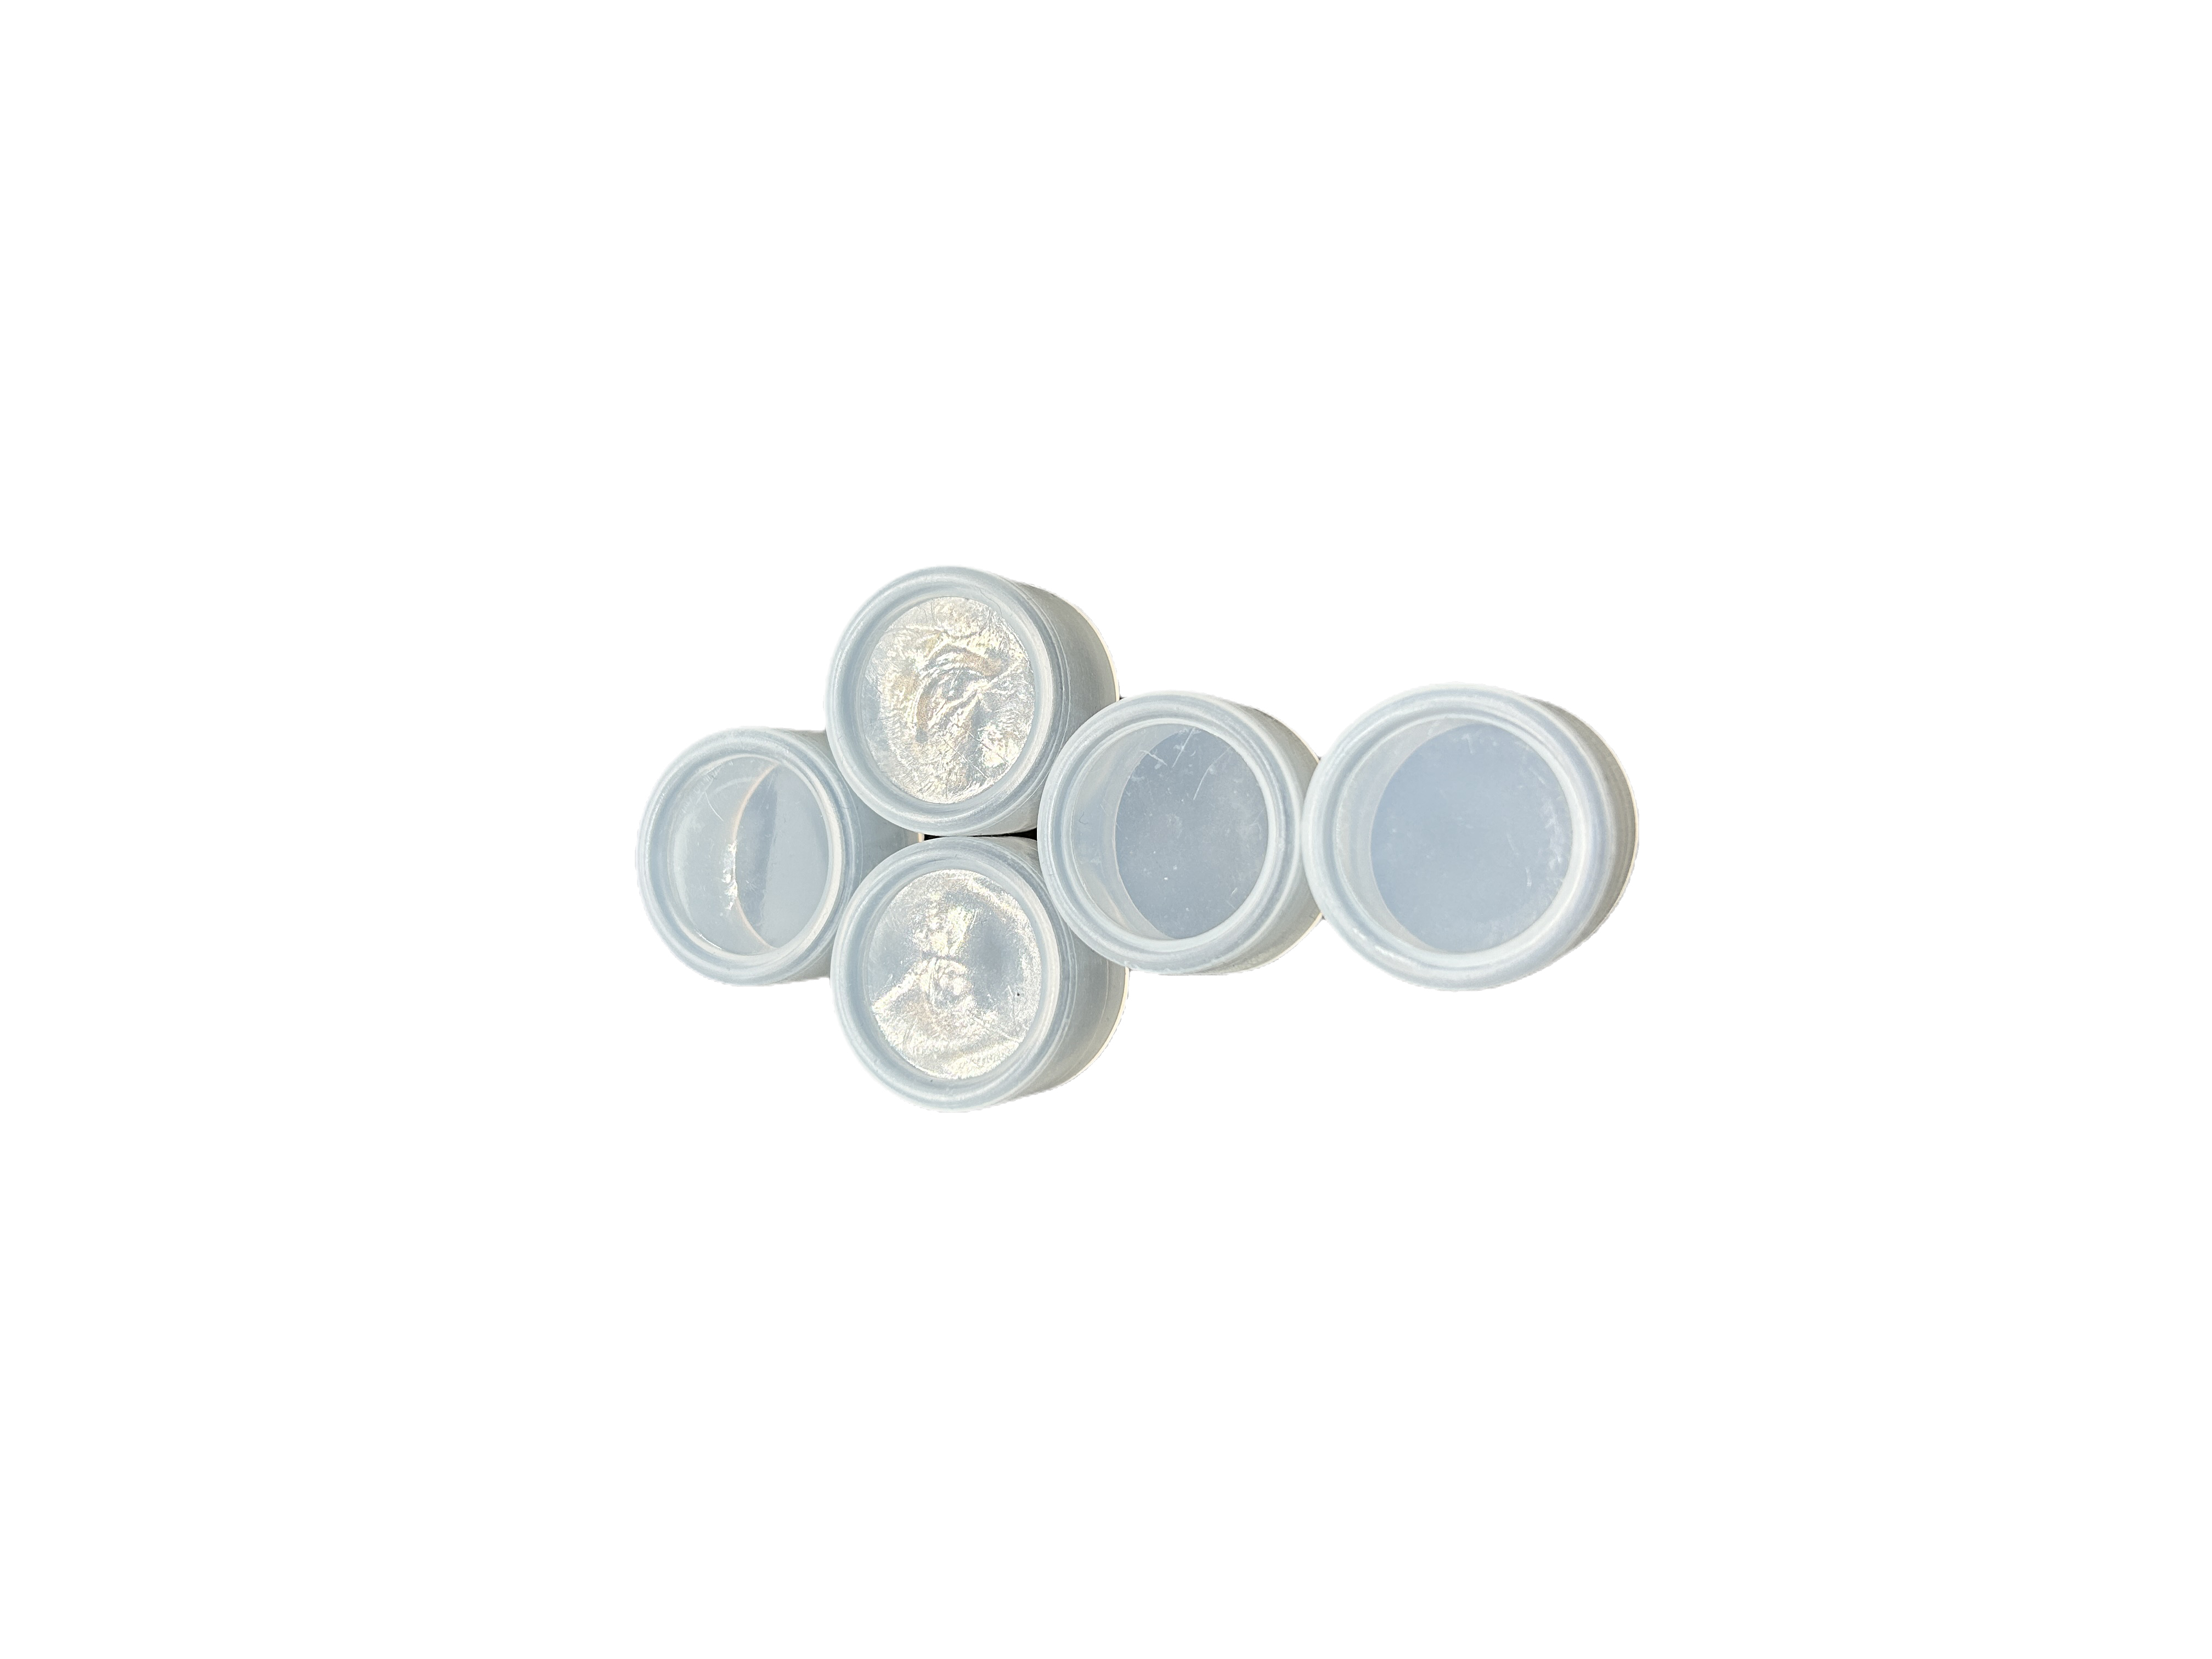 Circular silicone sleeve 22mm button waterproof cap, dustproof switch protective cover, transparent white sealing leather ring